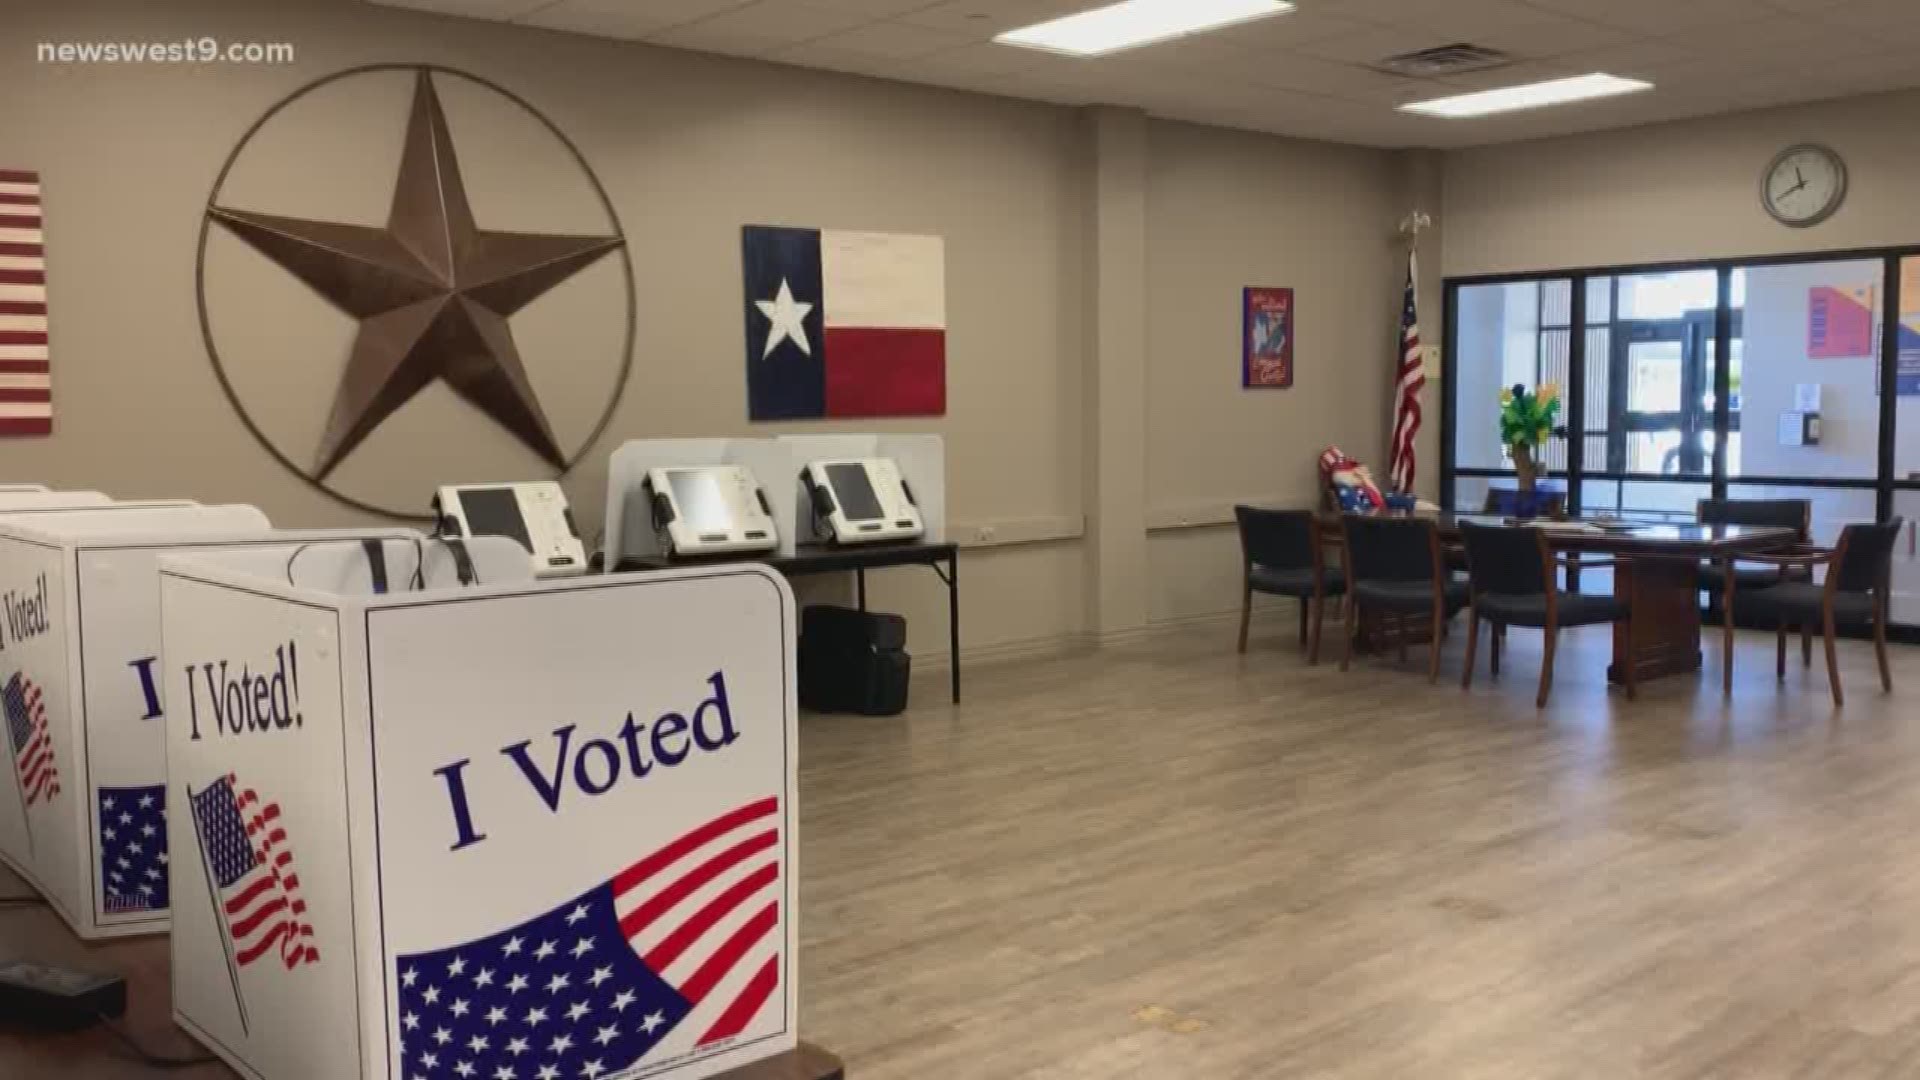 The primary runoff election will be held July 14